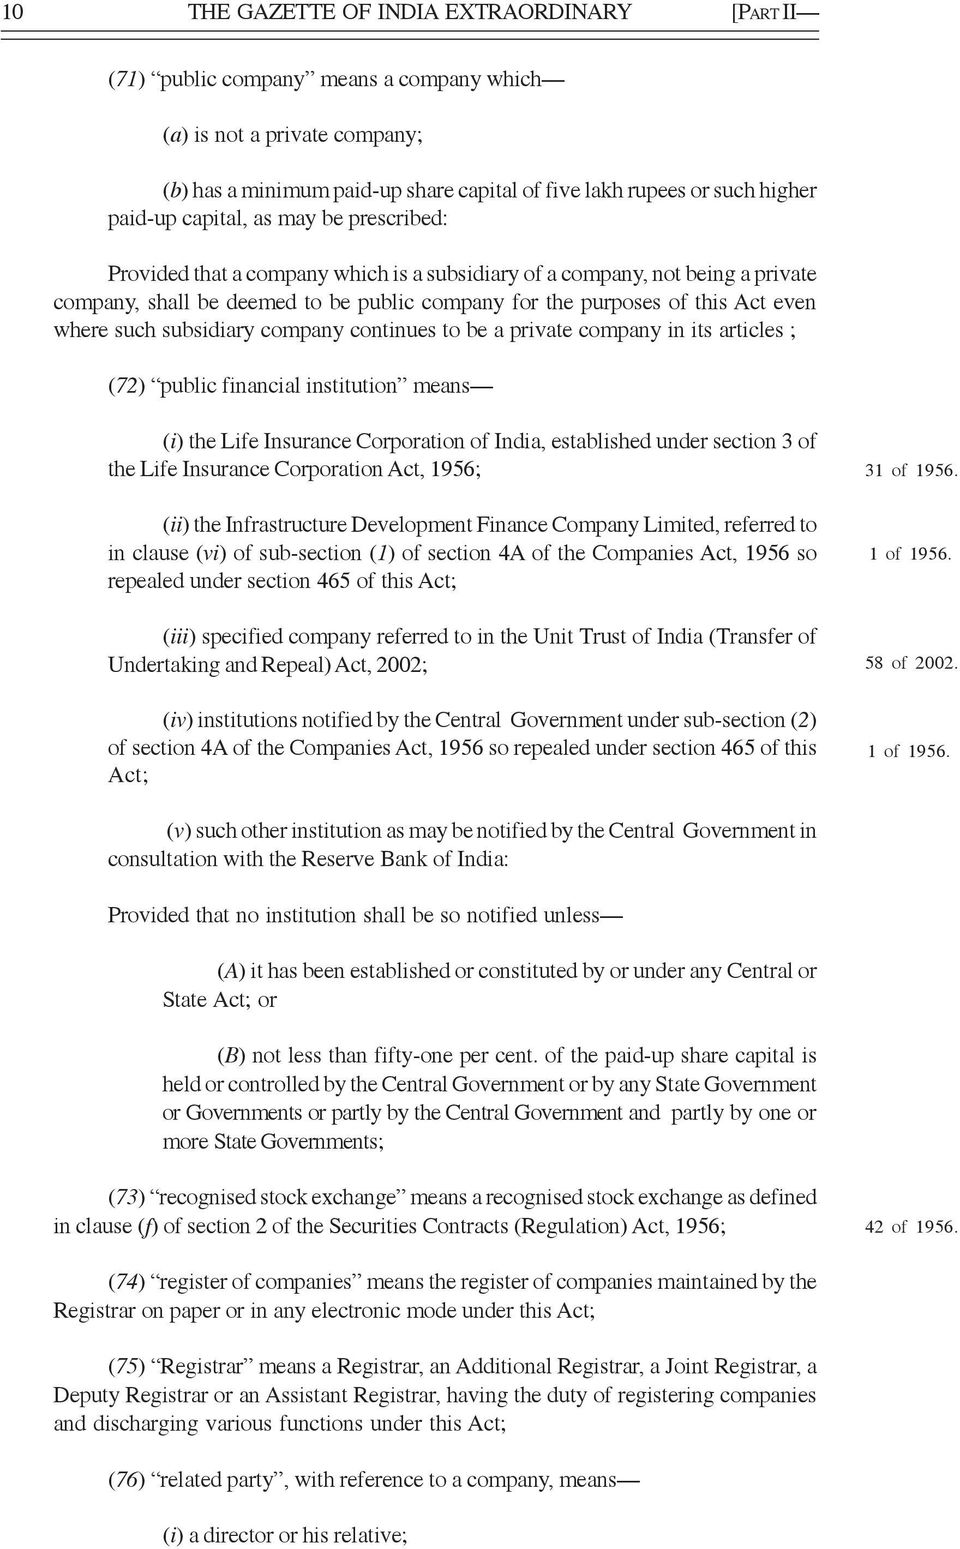 where such subsidiary company continues to be a private company in its articles ; (72) public financial institution means (i) the Life Insurance Corporation of India, established under section 3 of